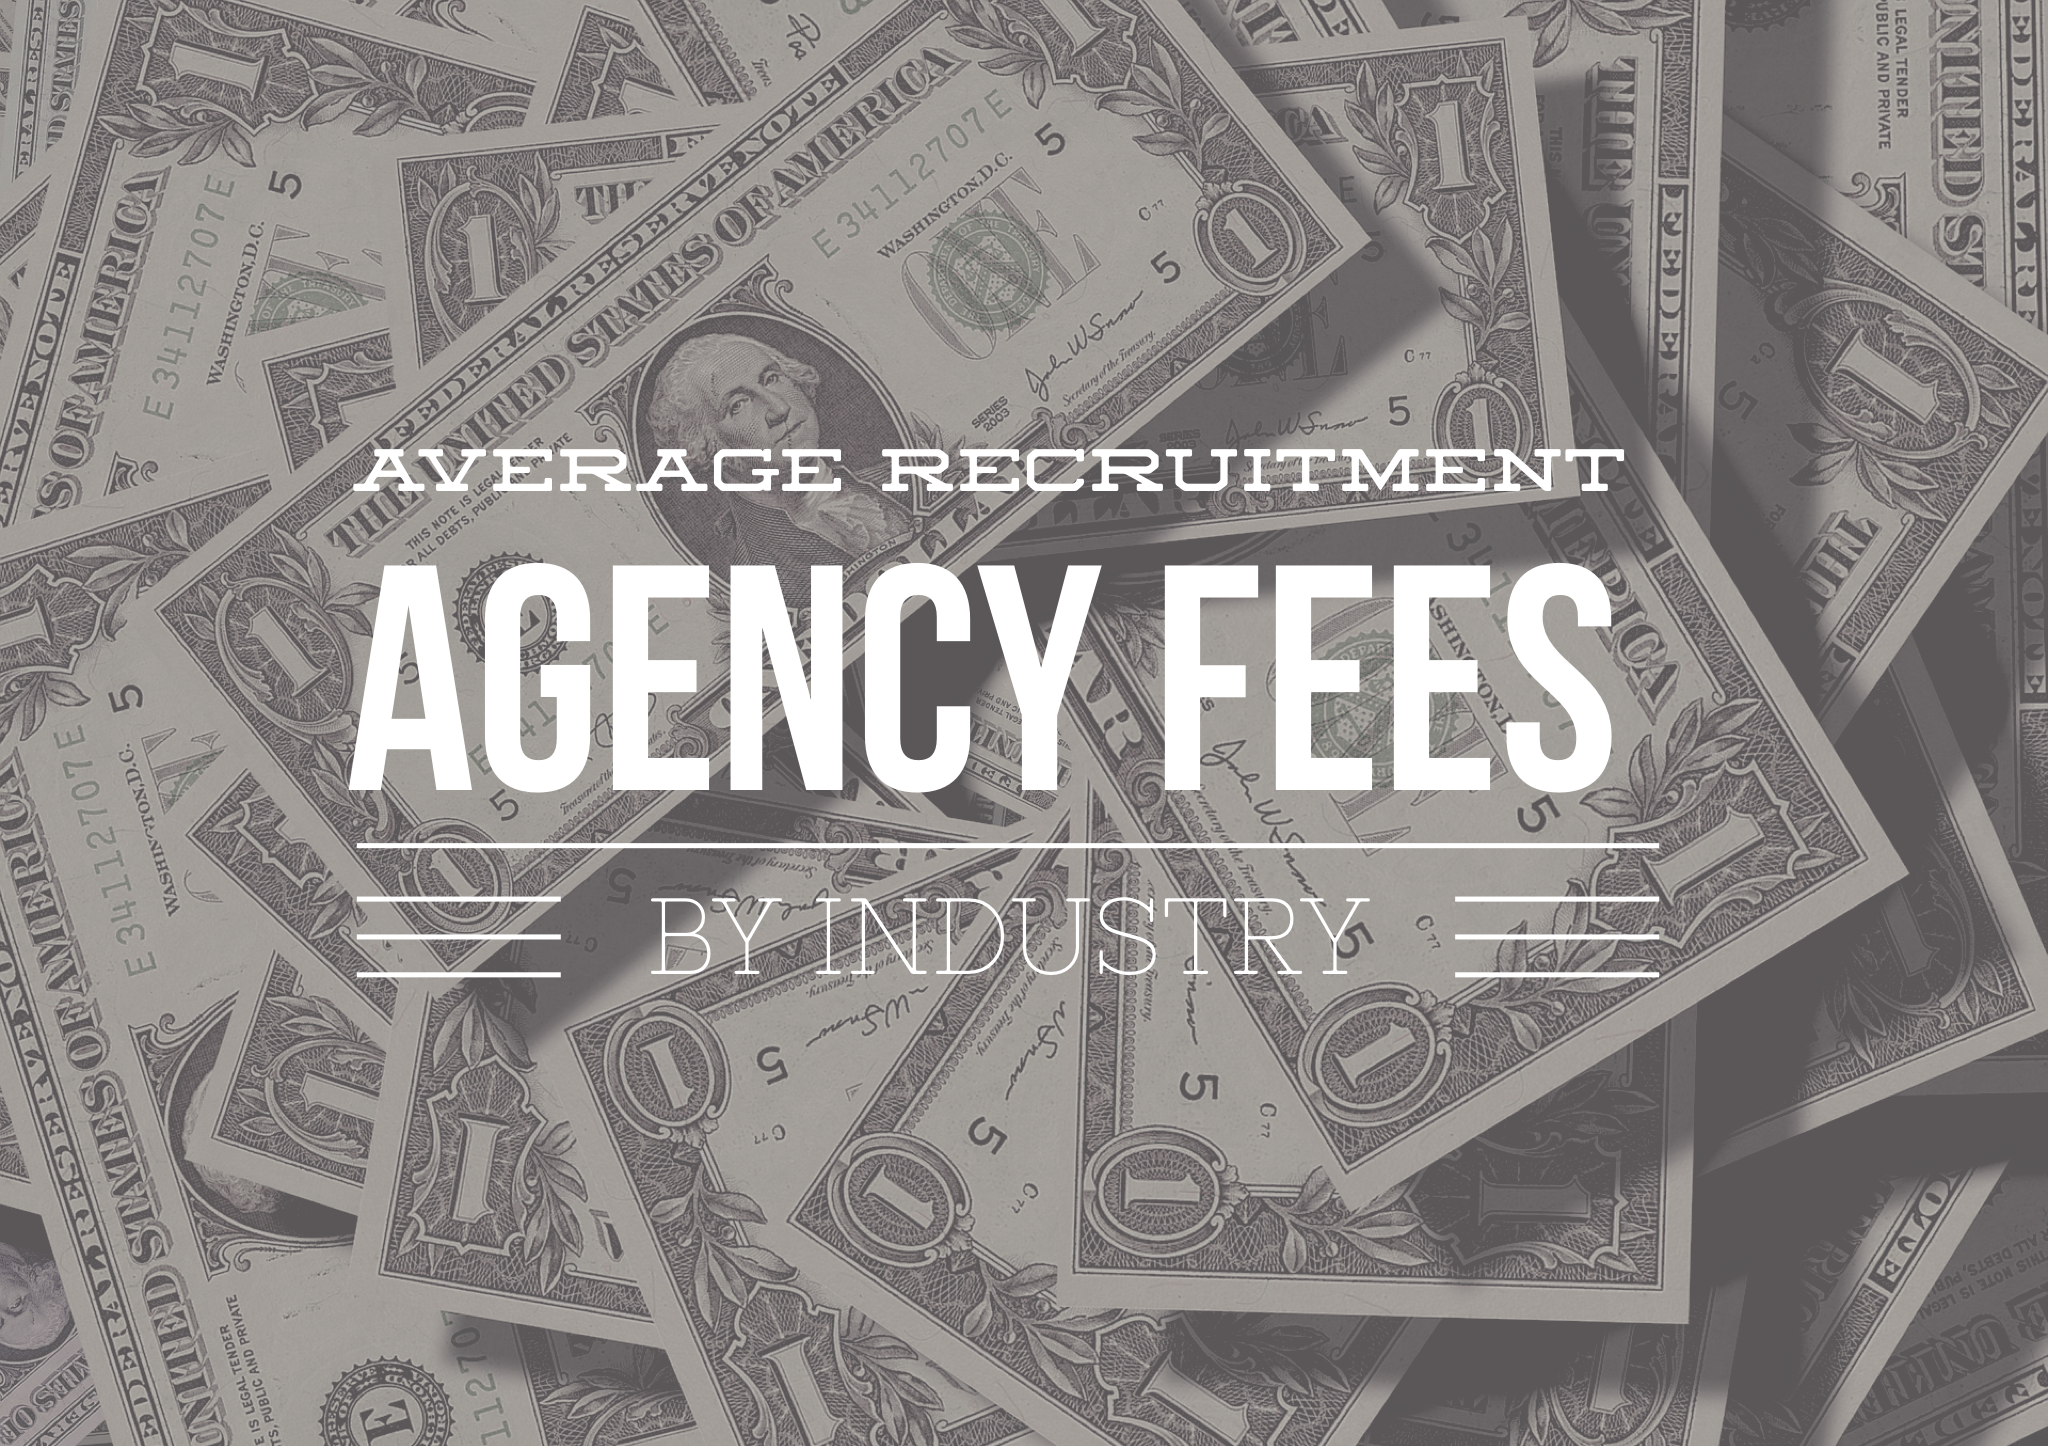 Average Recruitment Agency Fees by Industry